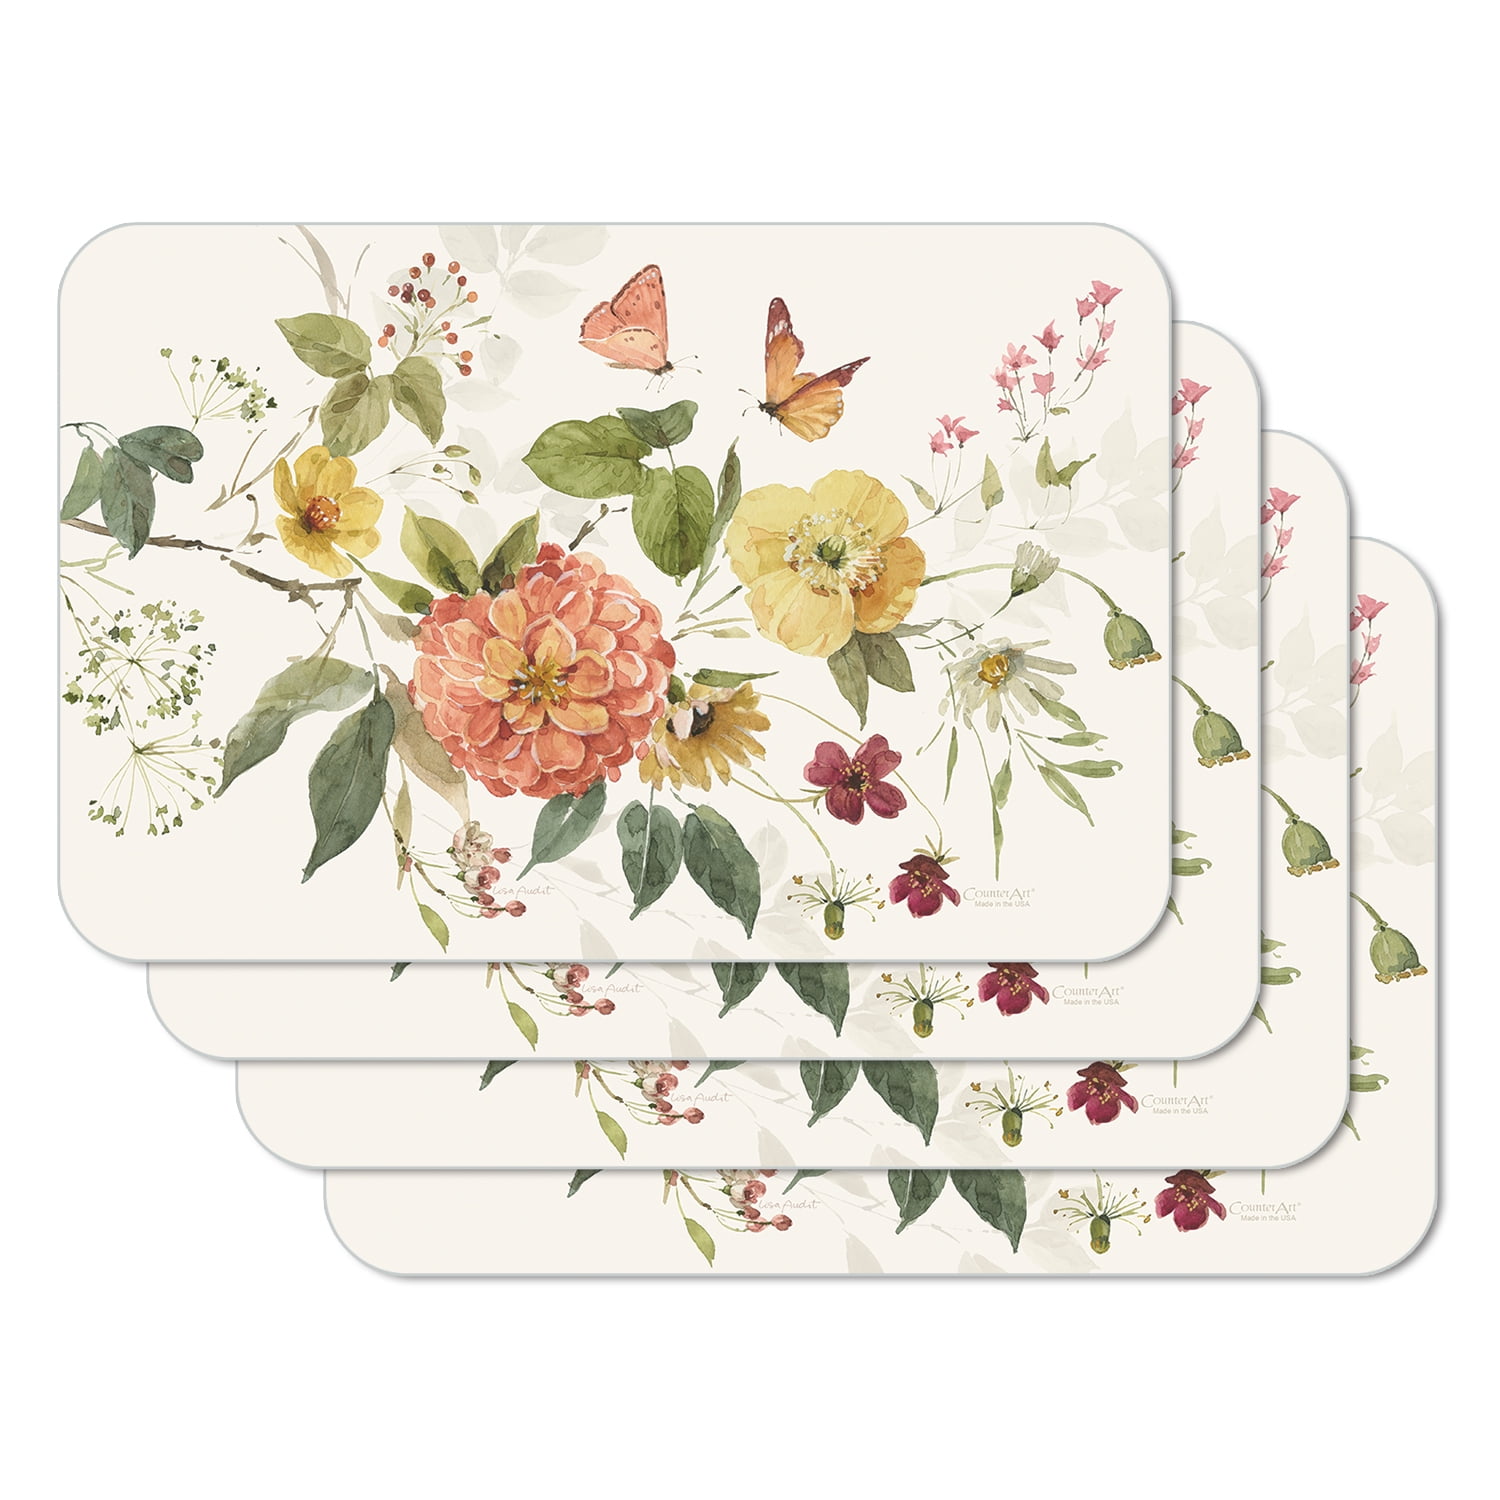 1pc Vintage Floral Coaster Set, Heat-Insulating Table Mats, Non